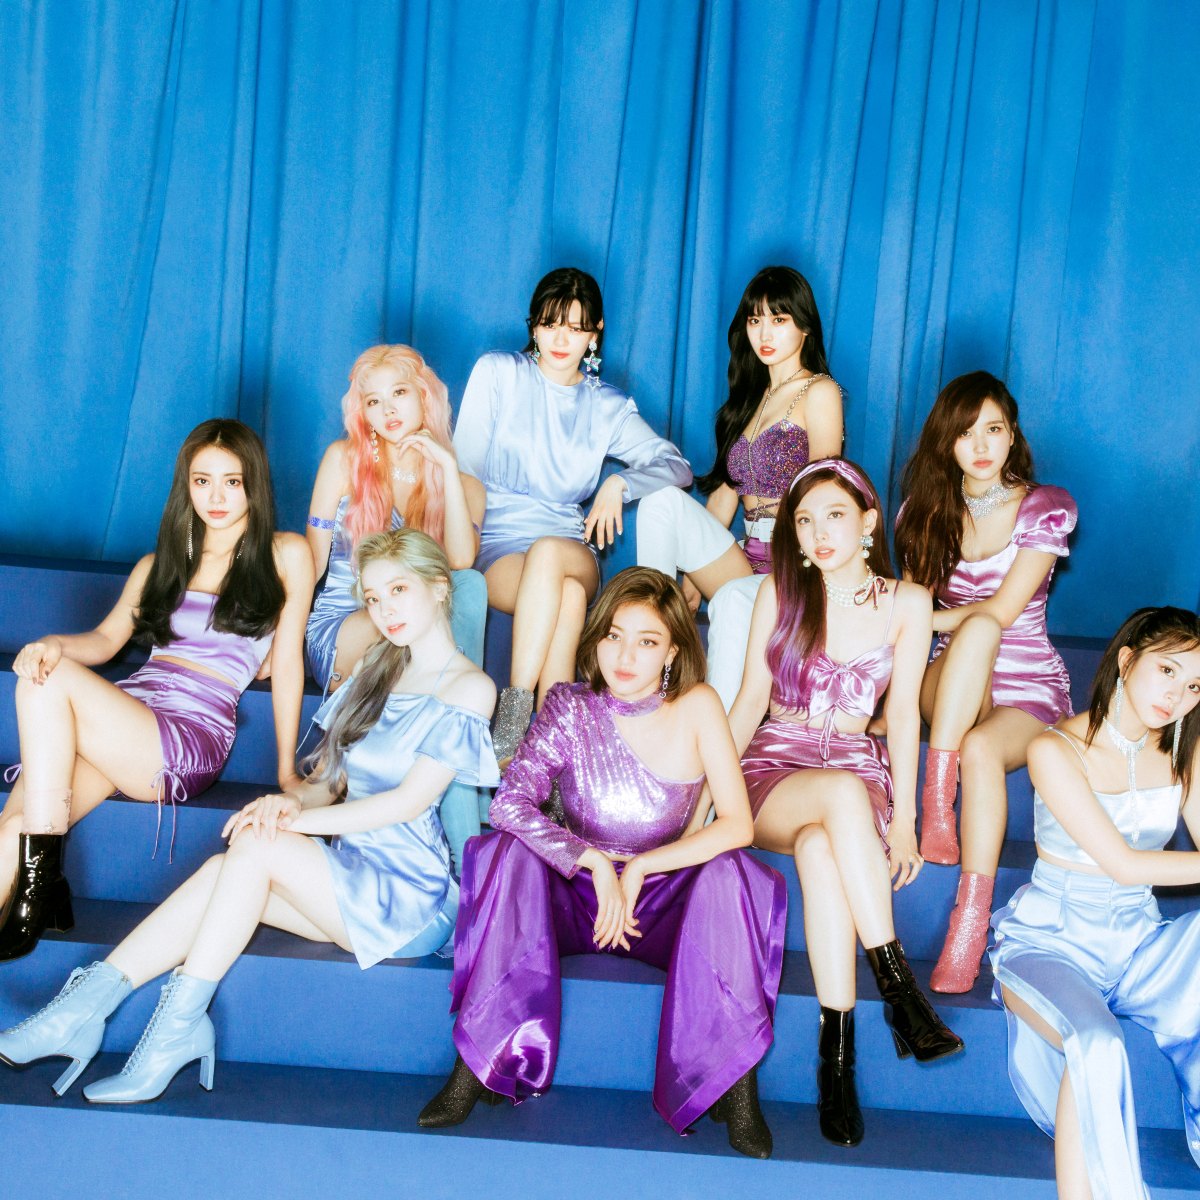 How Many Members Are in K-Pop Group Twice?